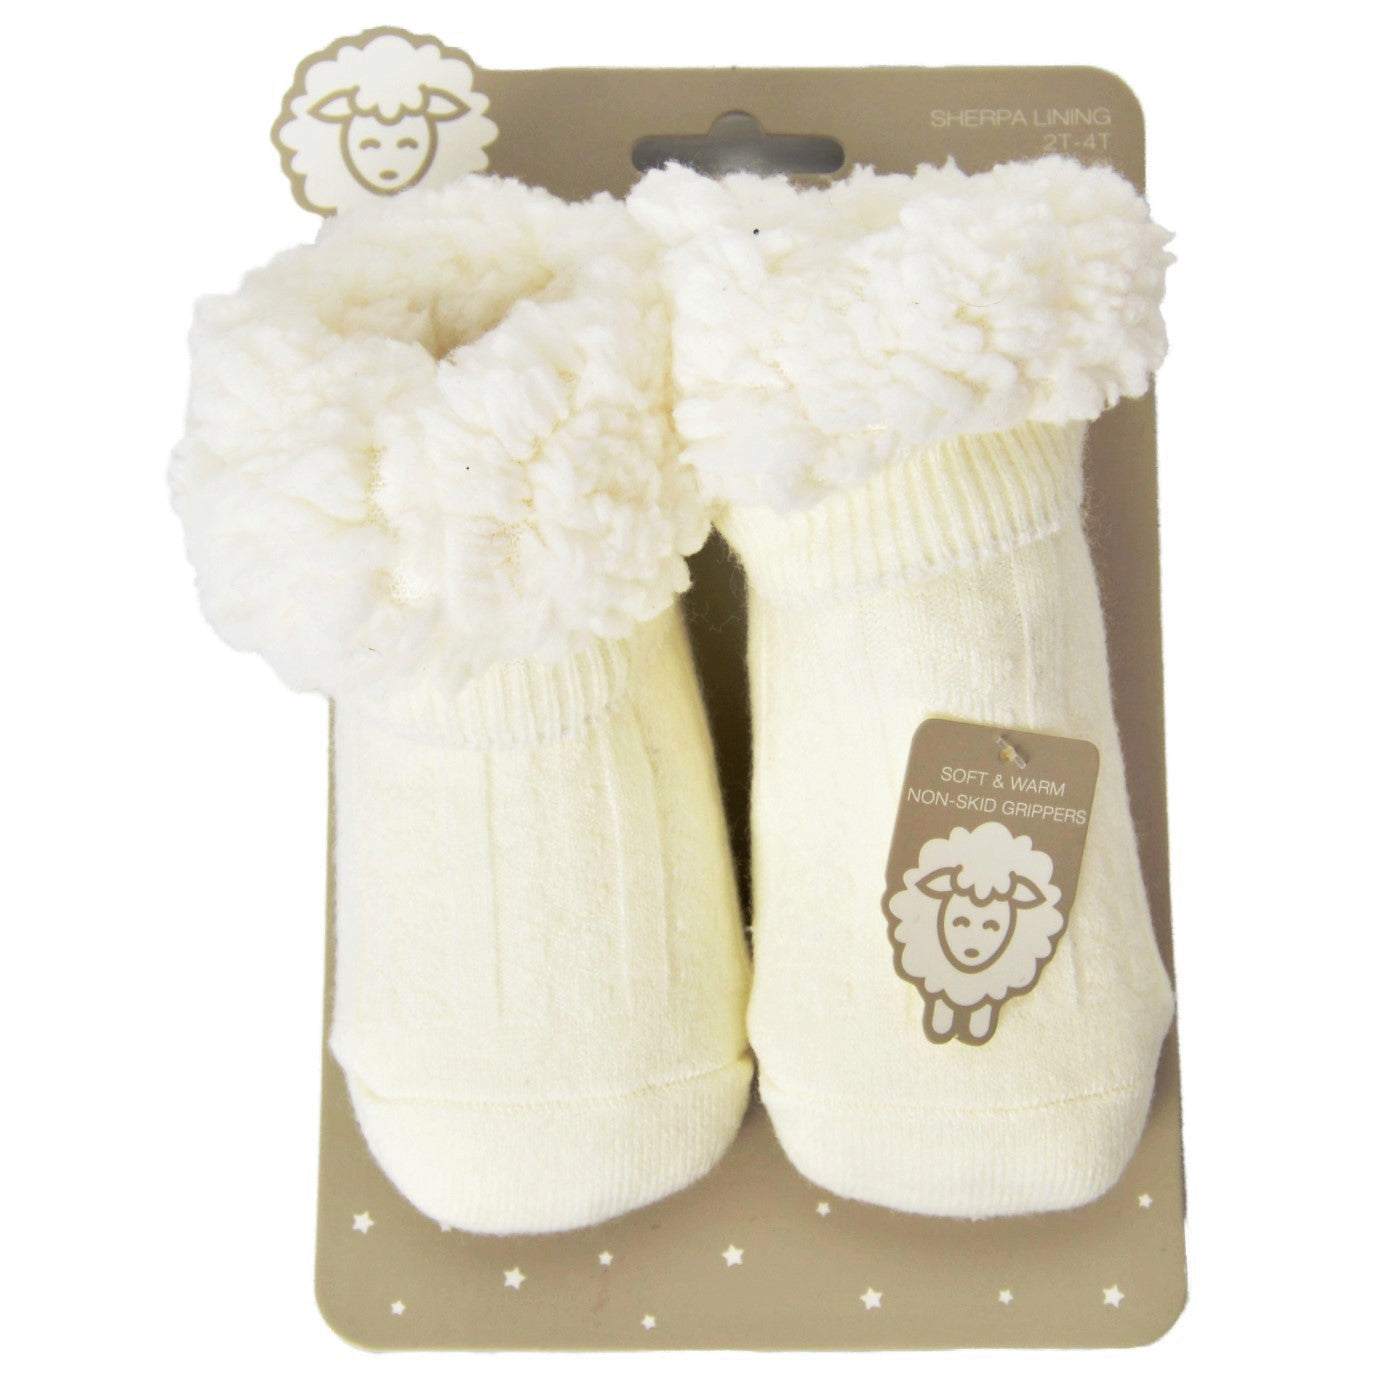 Adrianne Vittadini Toddler 2T-4T Kid's Unisex Cozy Sherpa Lined Booties Socks